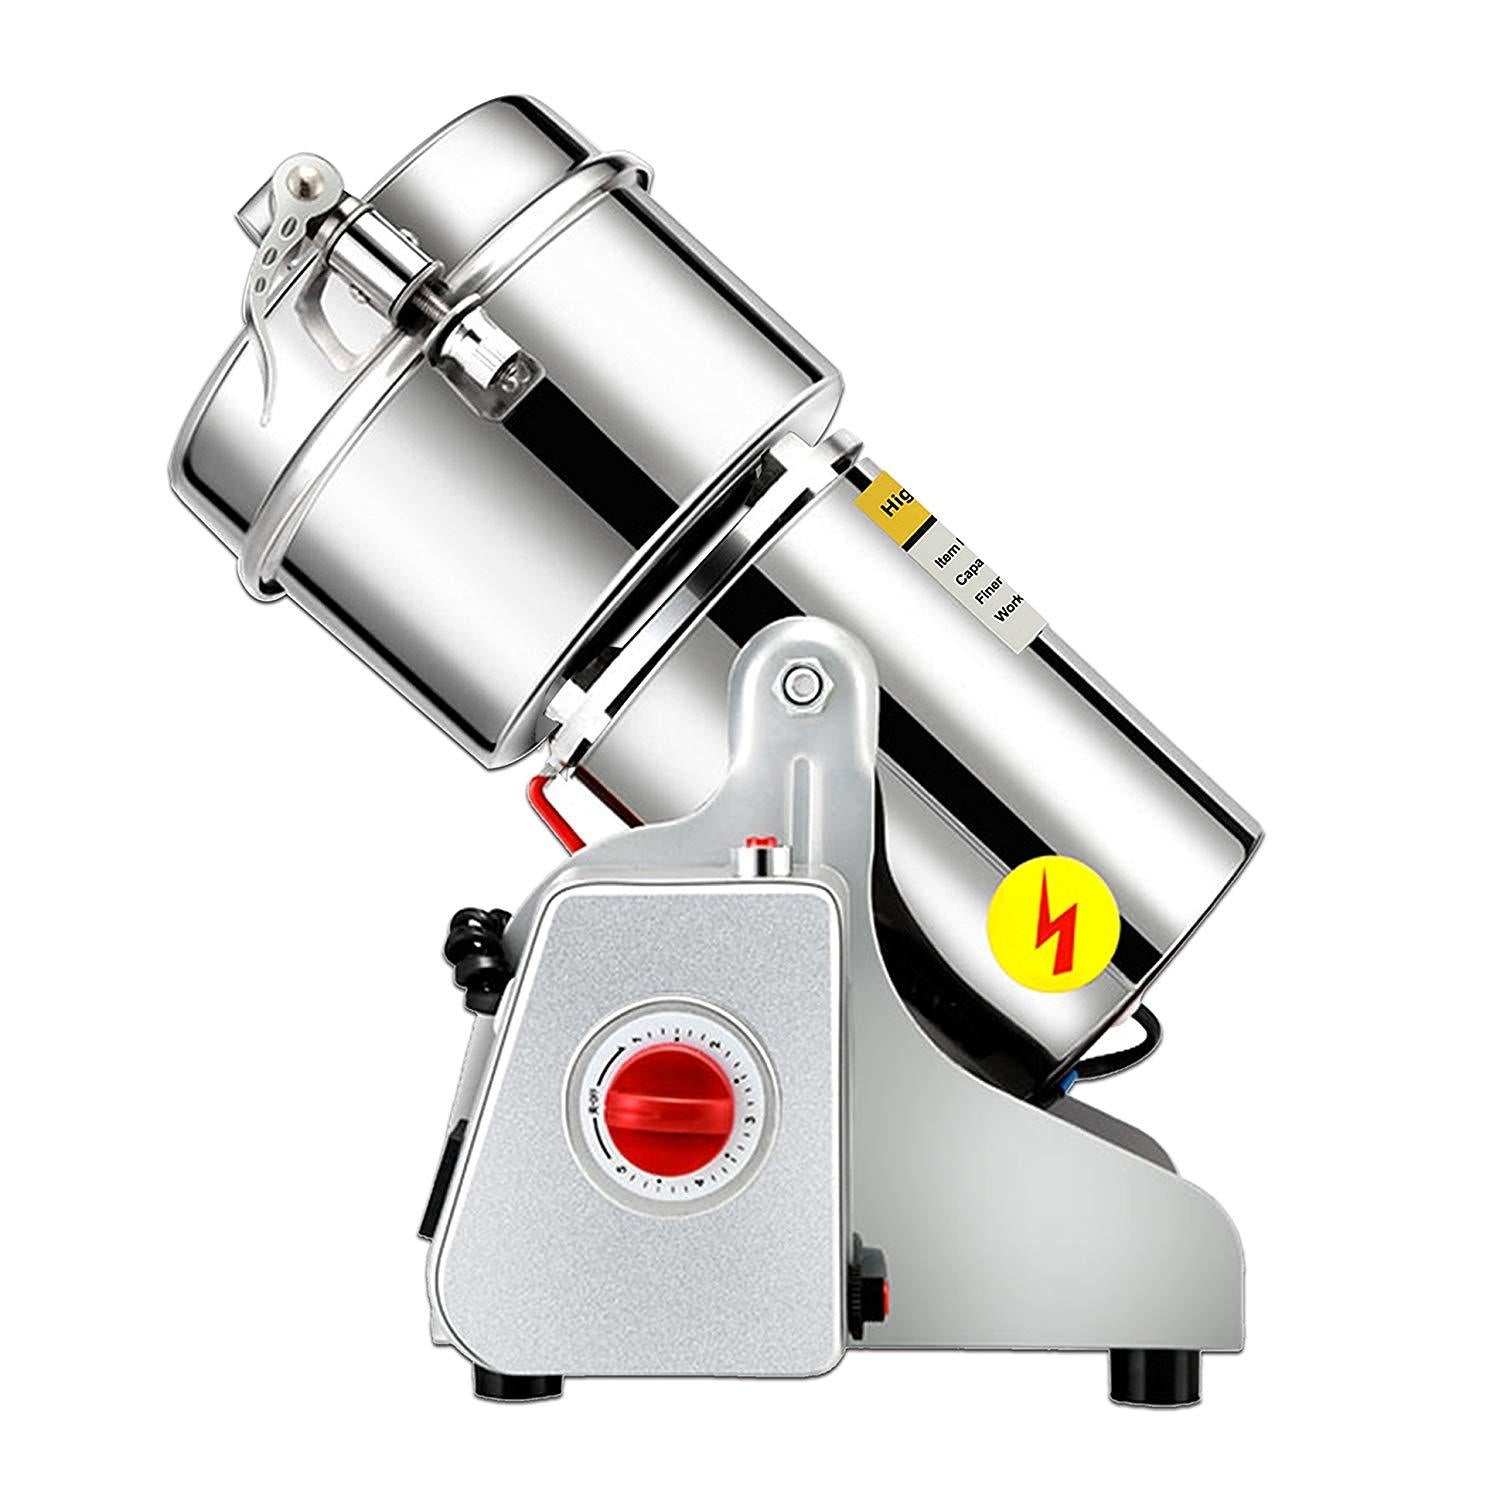  Grain Mills Spice Grinder Nut Grinder Food Mill Sup Stainless  Steel Electric High-Speed Medicial Powder Machine Commercial Cereals Grain  Mill Herb Grinder Pulverizer for Wheat Grains Corn Nut : Everything Else